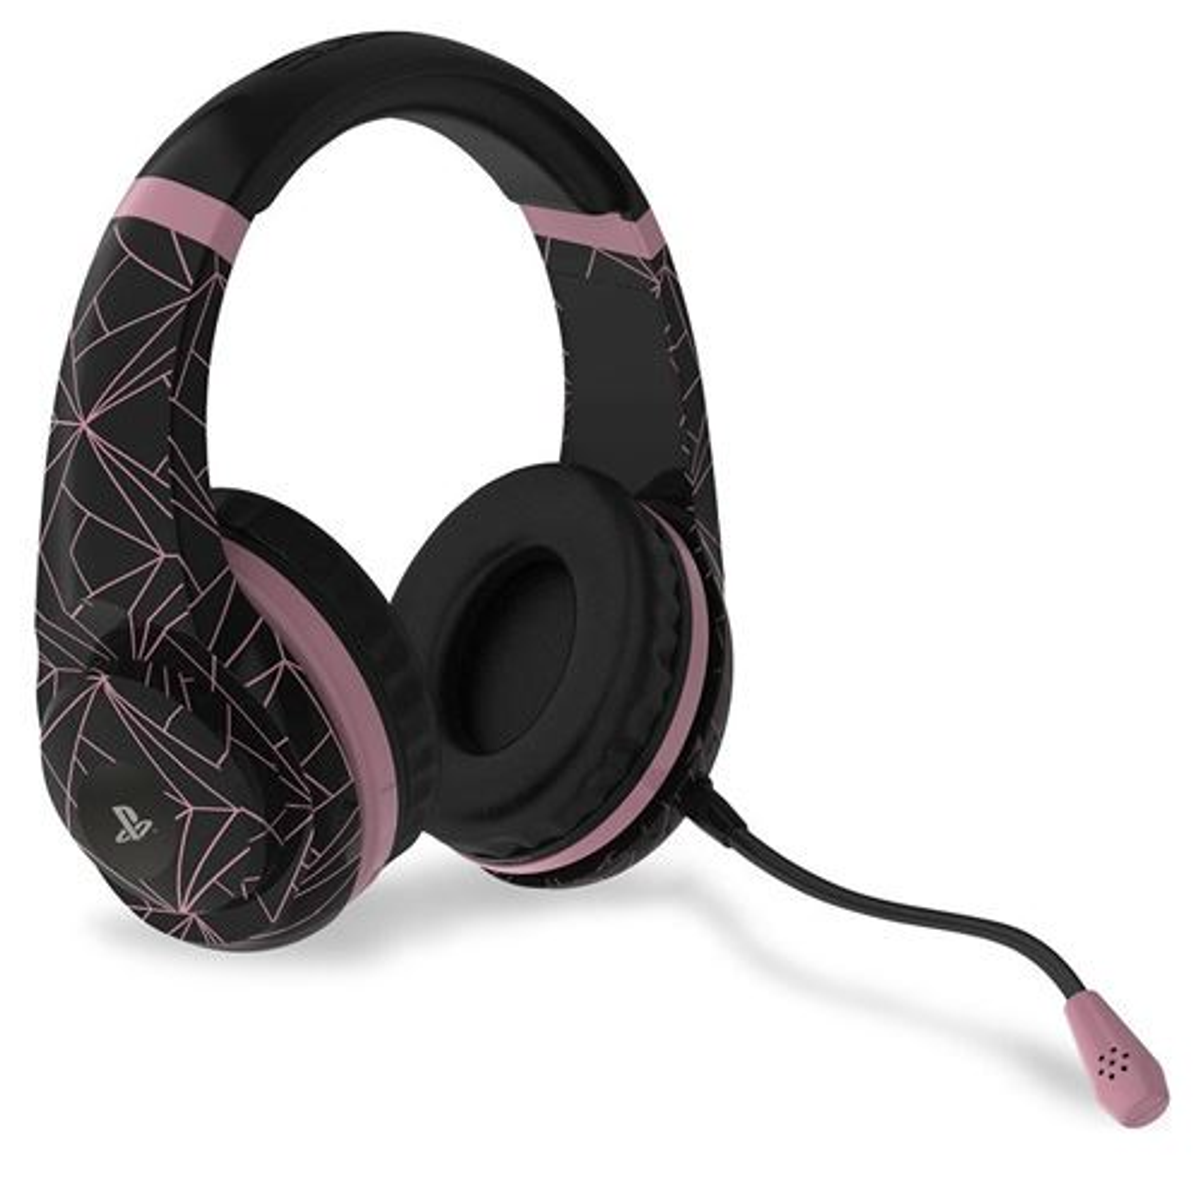 4 GAMERS PRO4-70-RGA Schwarz/Roségold HEADSET GOLD.ED.-ABSTRACT, Headset ROSE BLK On-ear Gaming